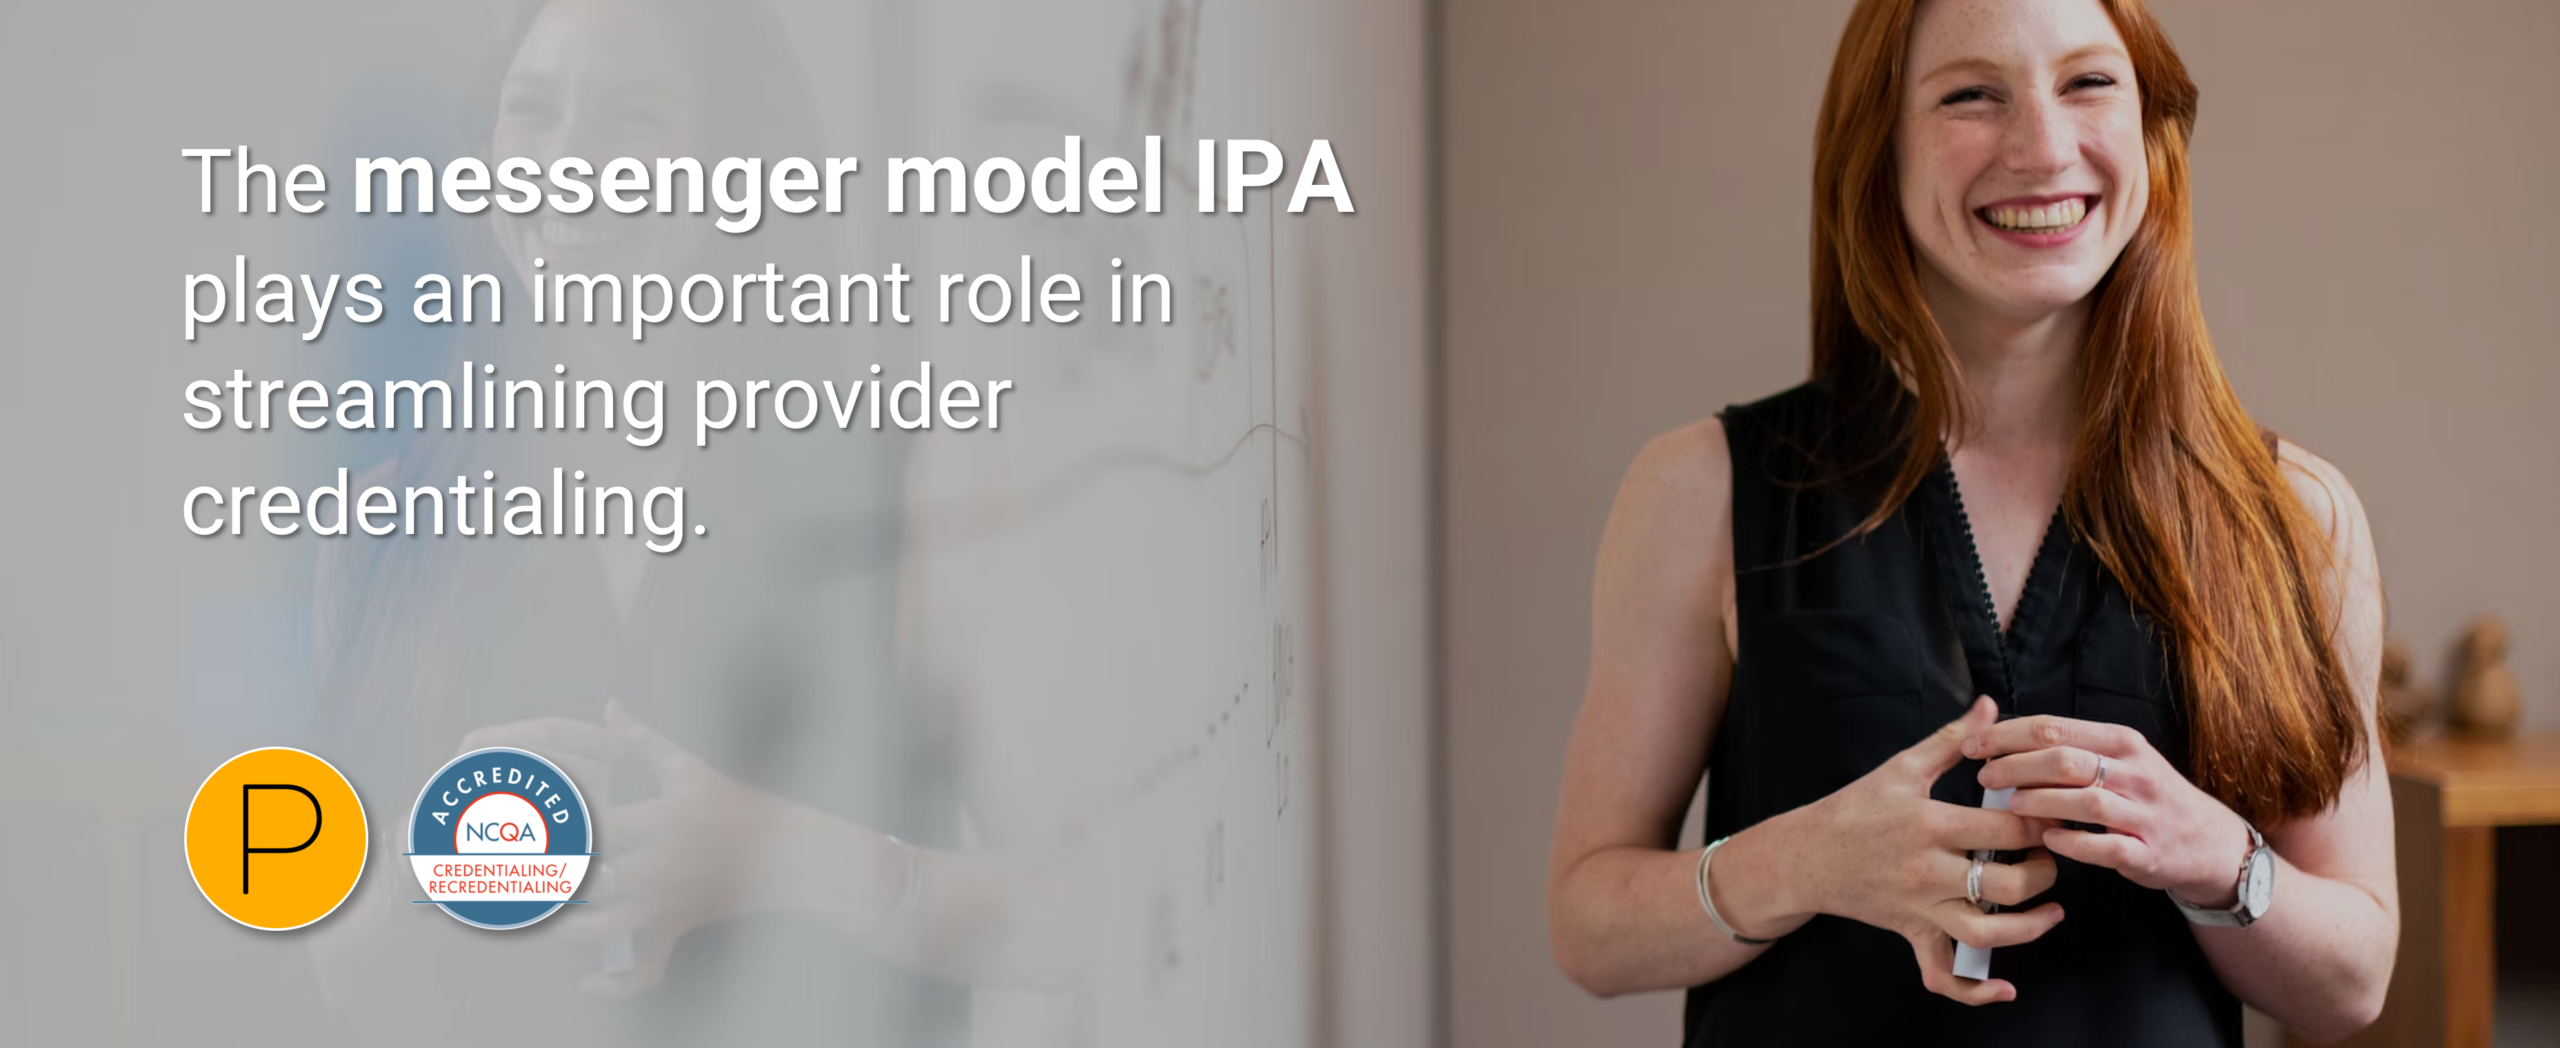 Messenger Model IPAs Important Role In Streamlining Credentialing